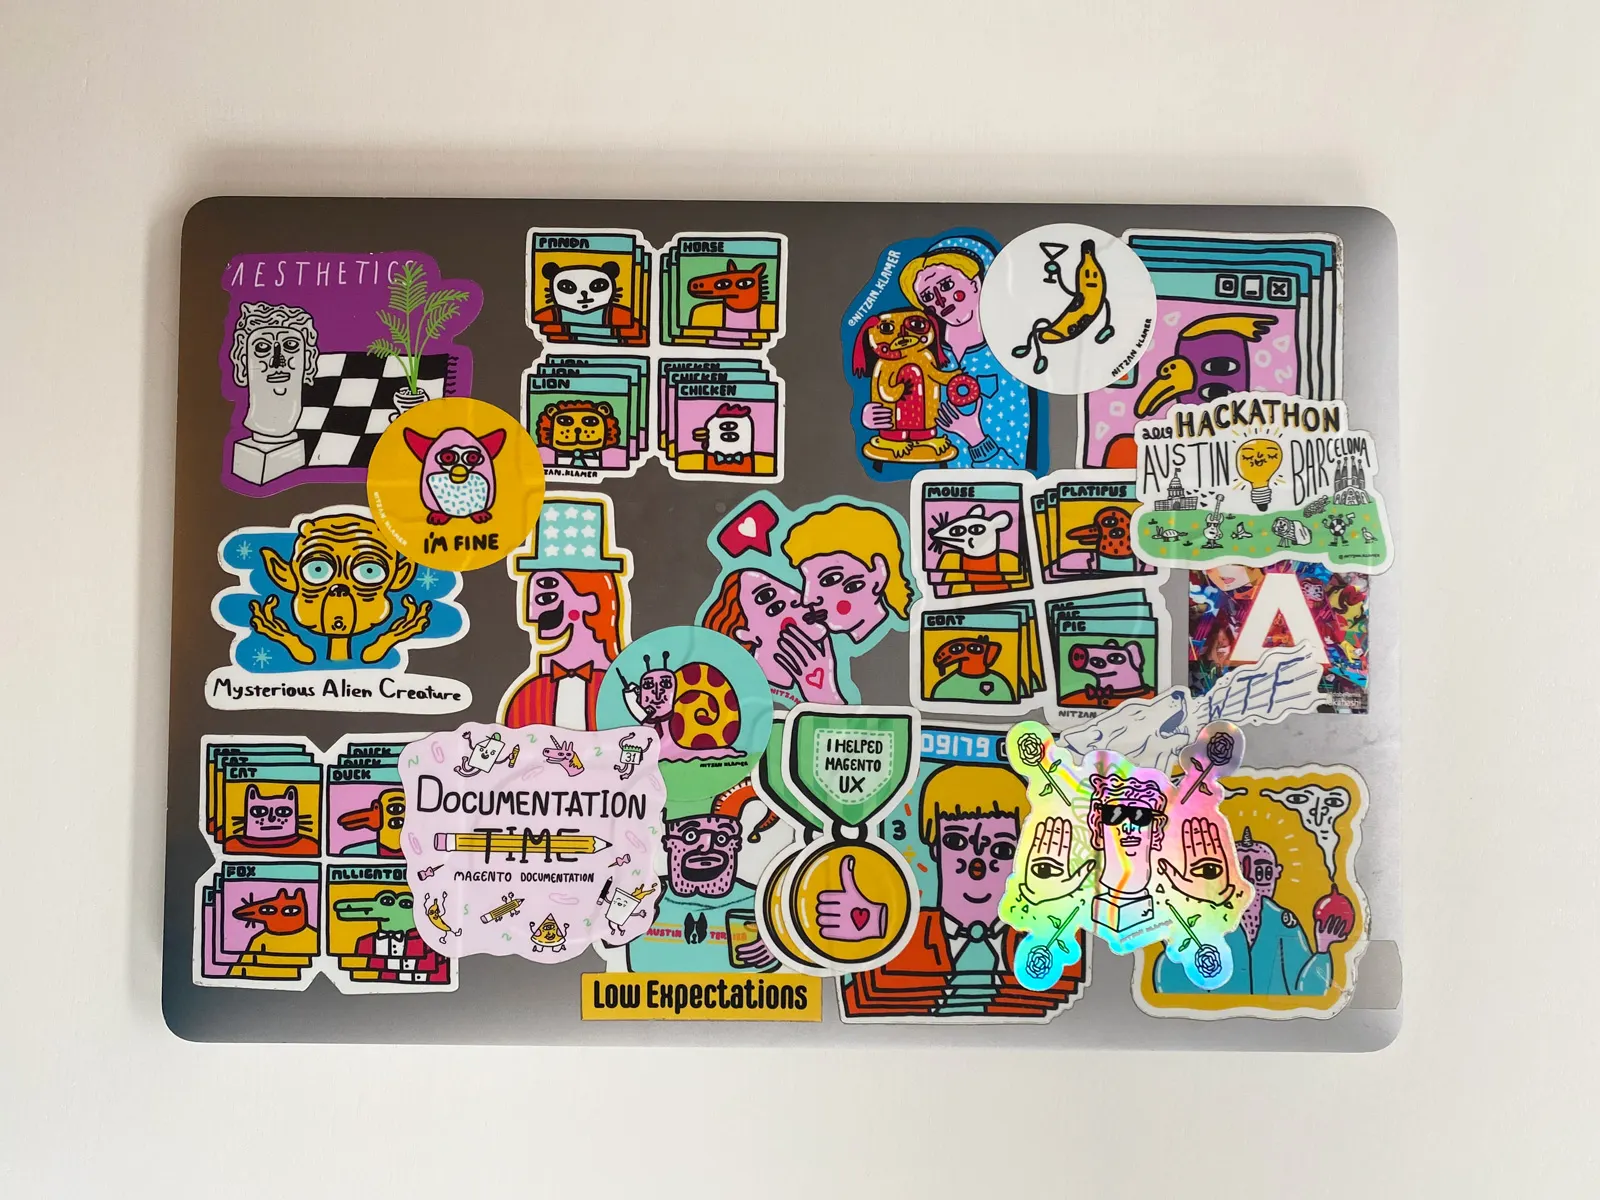 A closed laptop covered with multiple stickers.